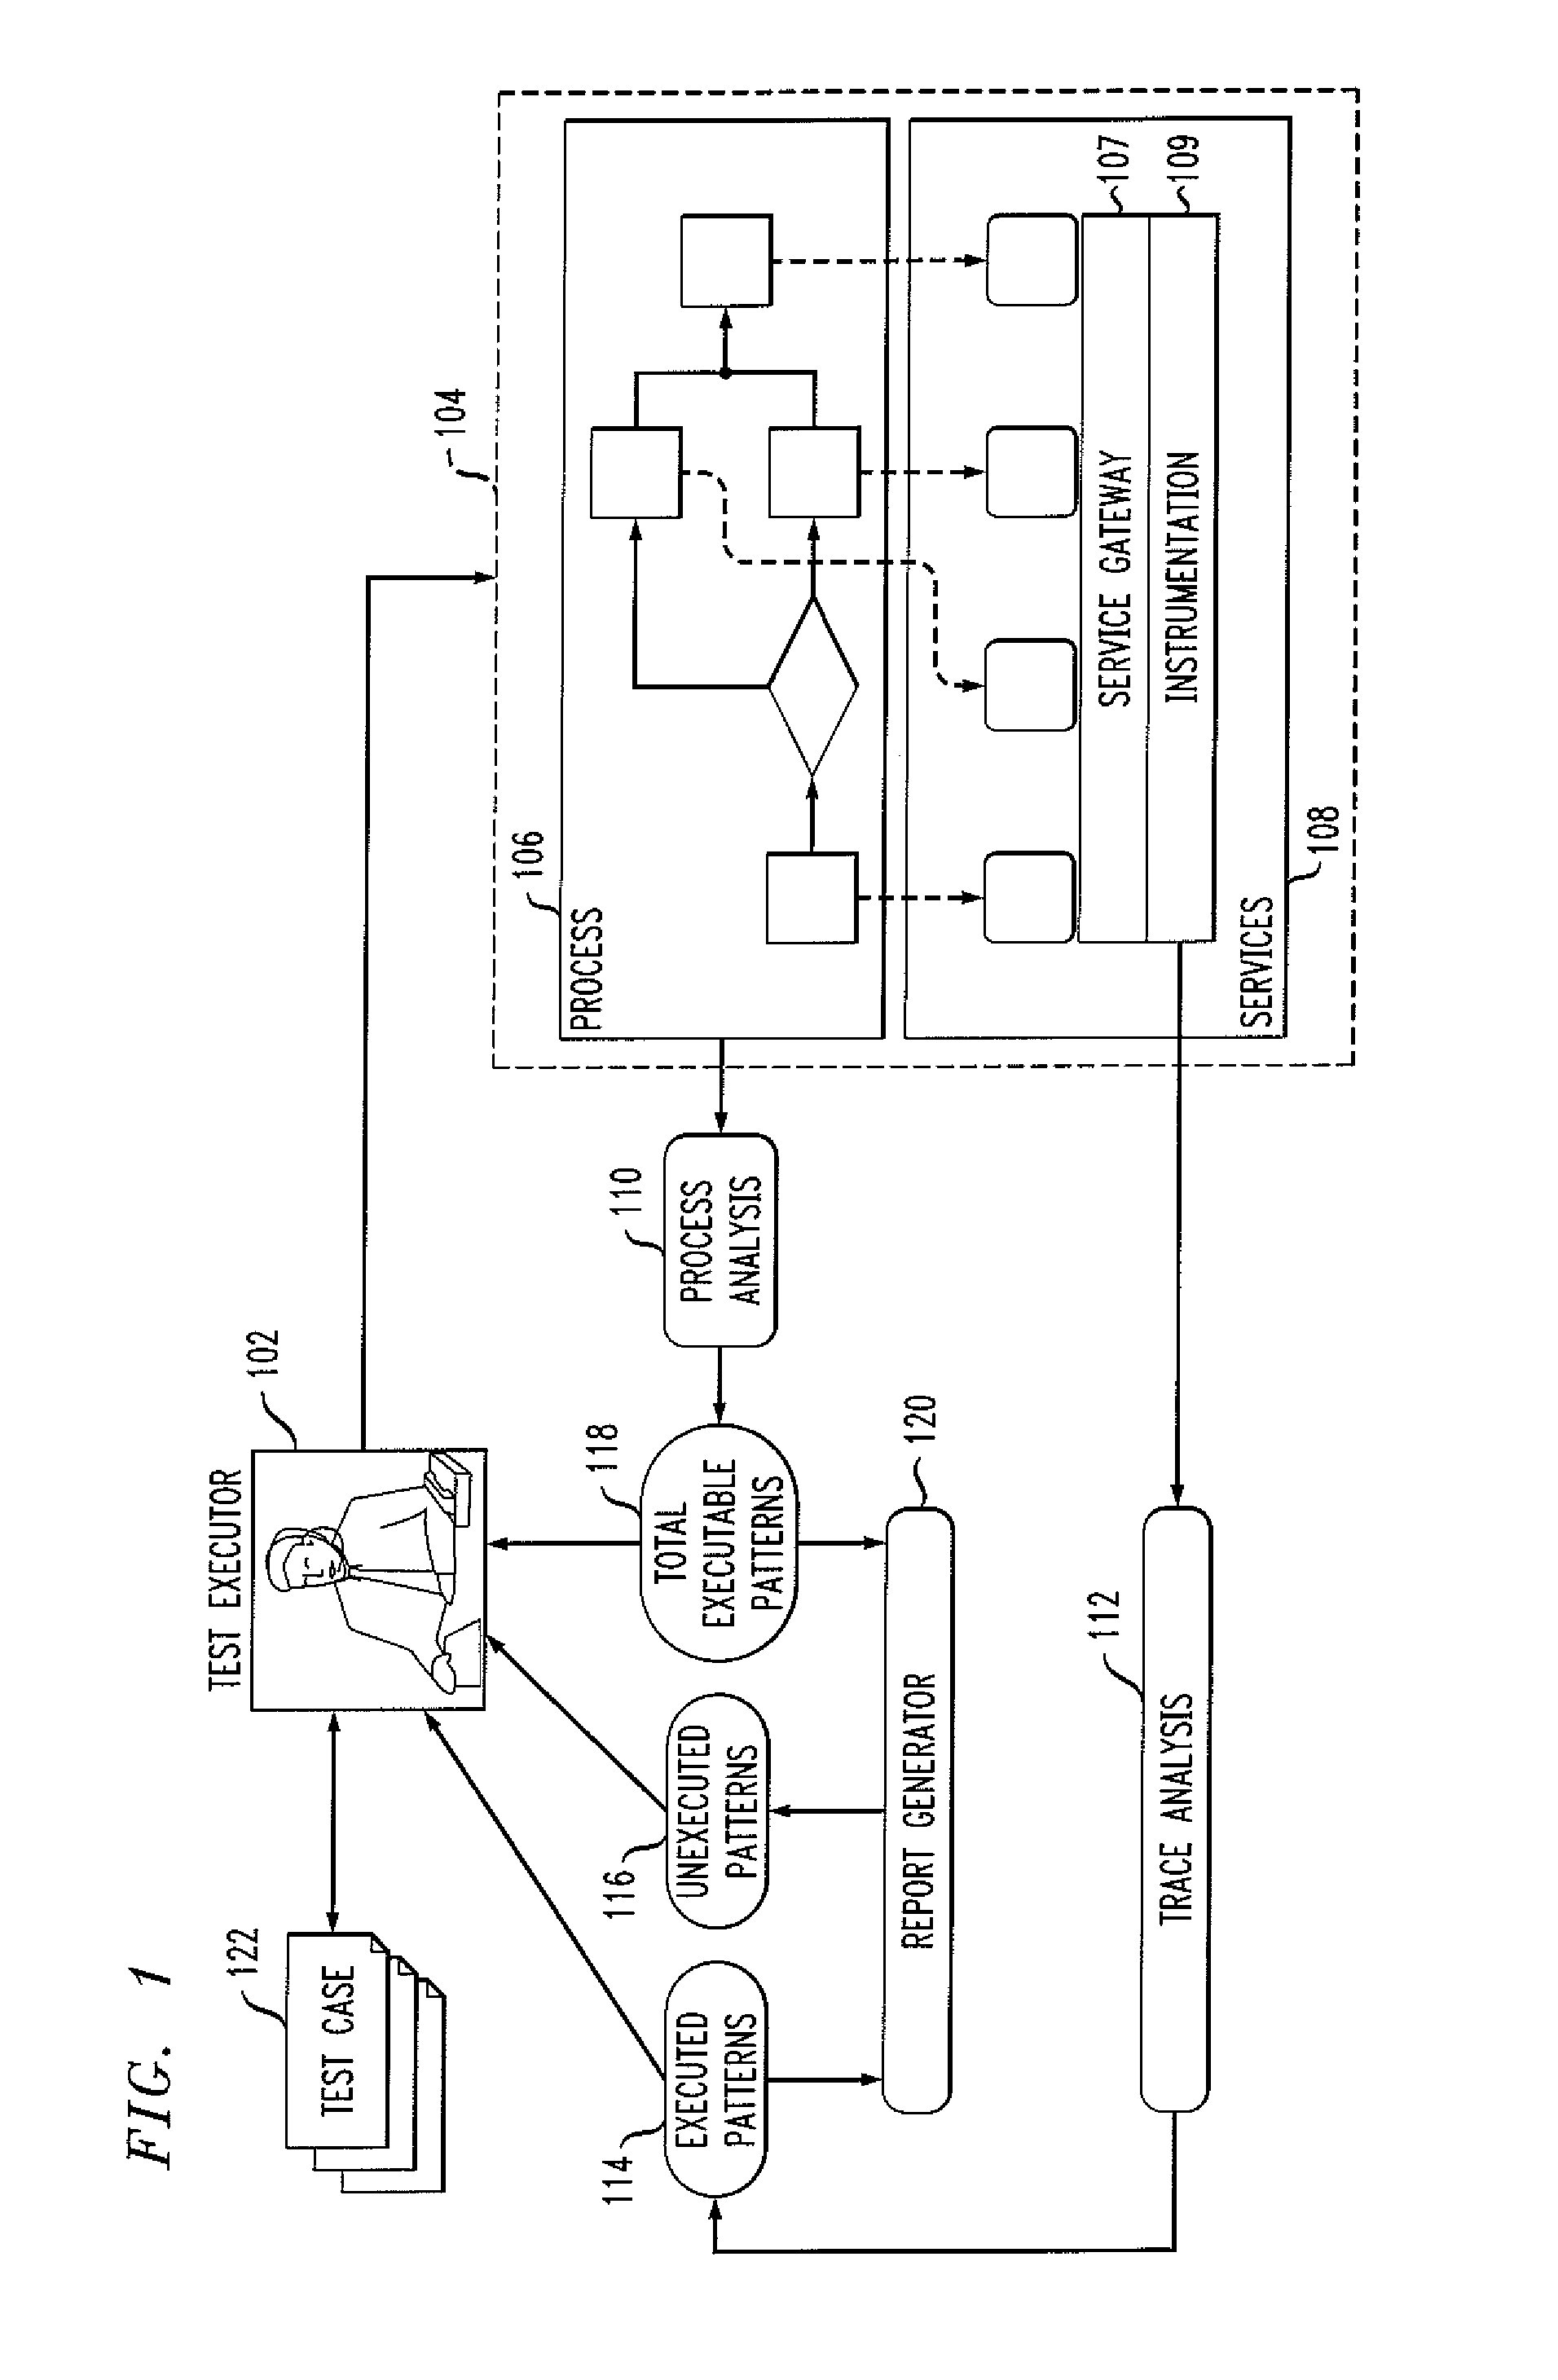 Method for analyzing transaction traces to enable process testing